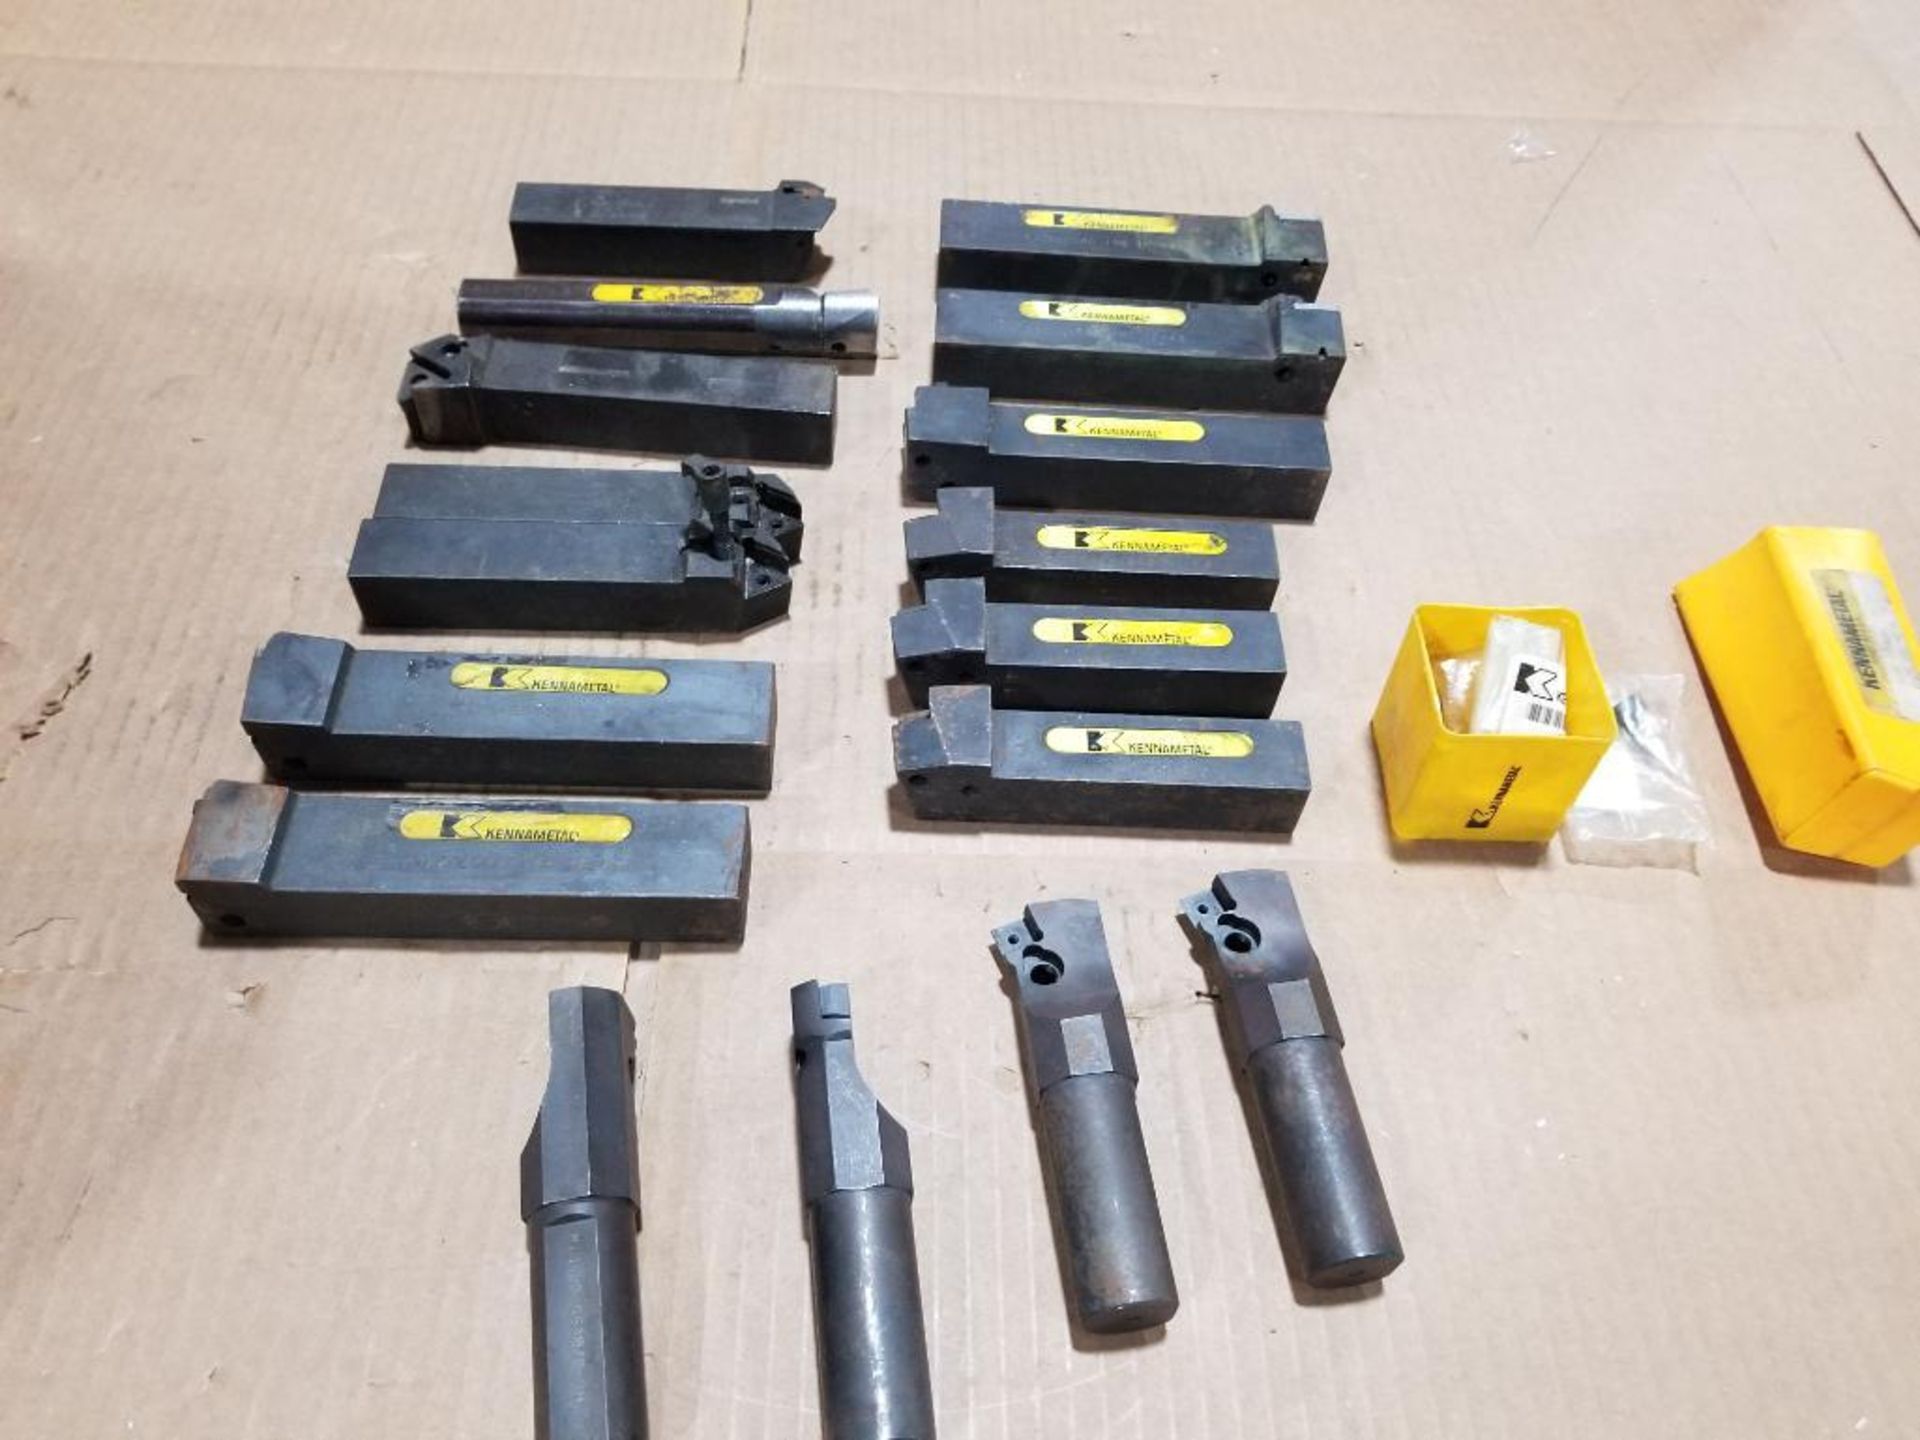 Qty 17 - Assorted indexable tool holders, boring bars, etc. Mostly Kennametal.